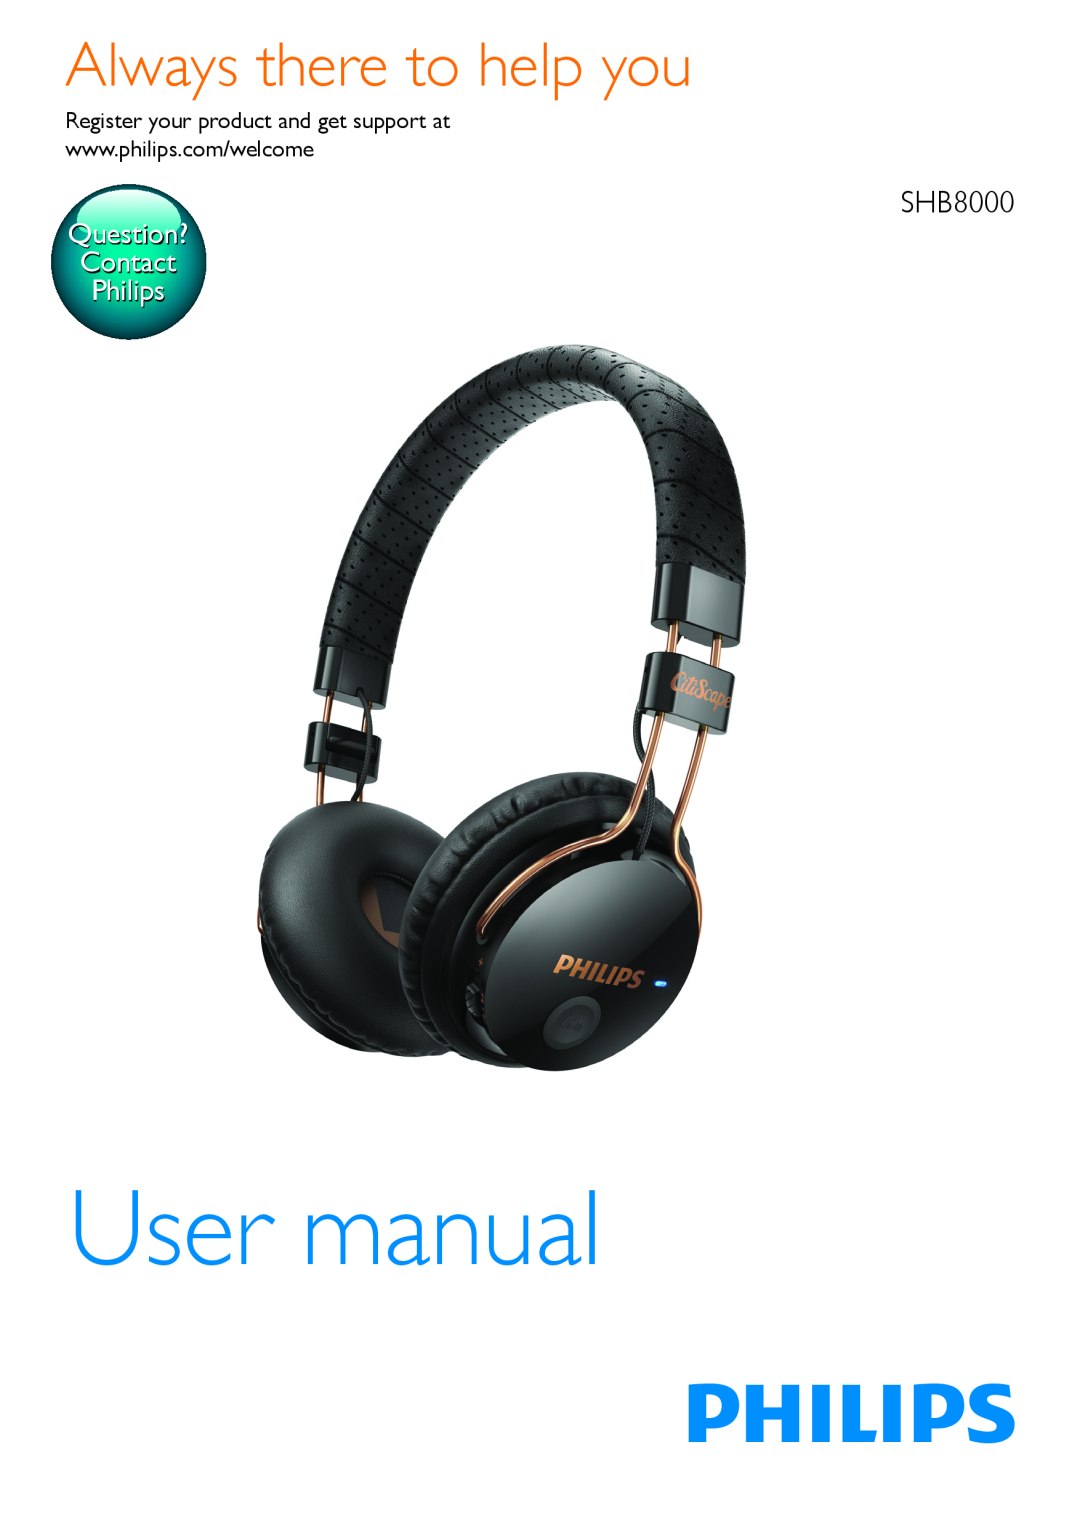 Philips SHB8000 user manual Always there to help you, Question? Contact Philips 